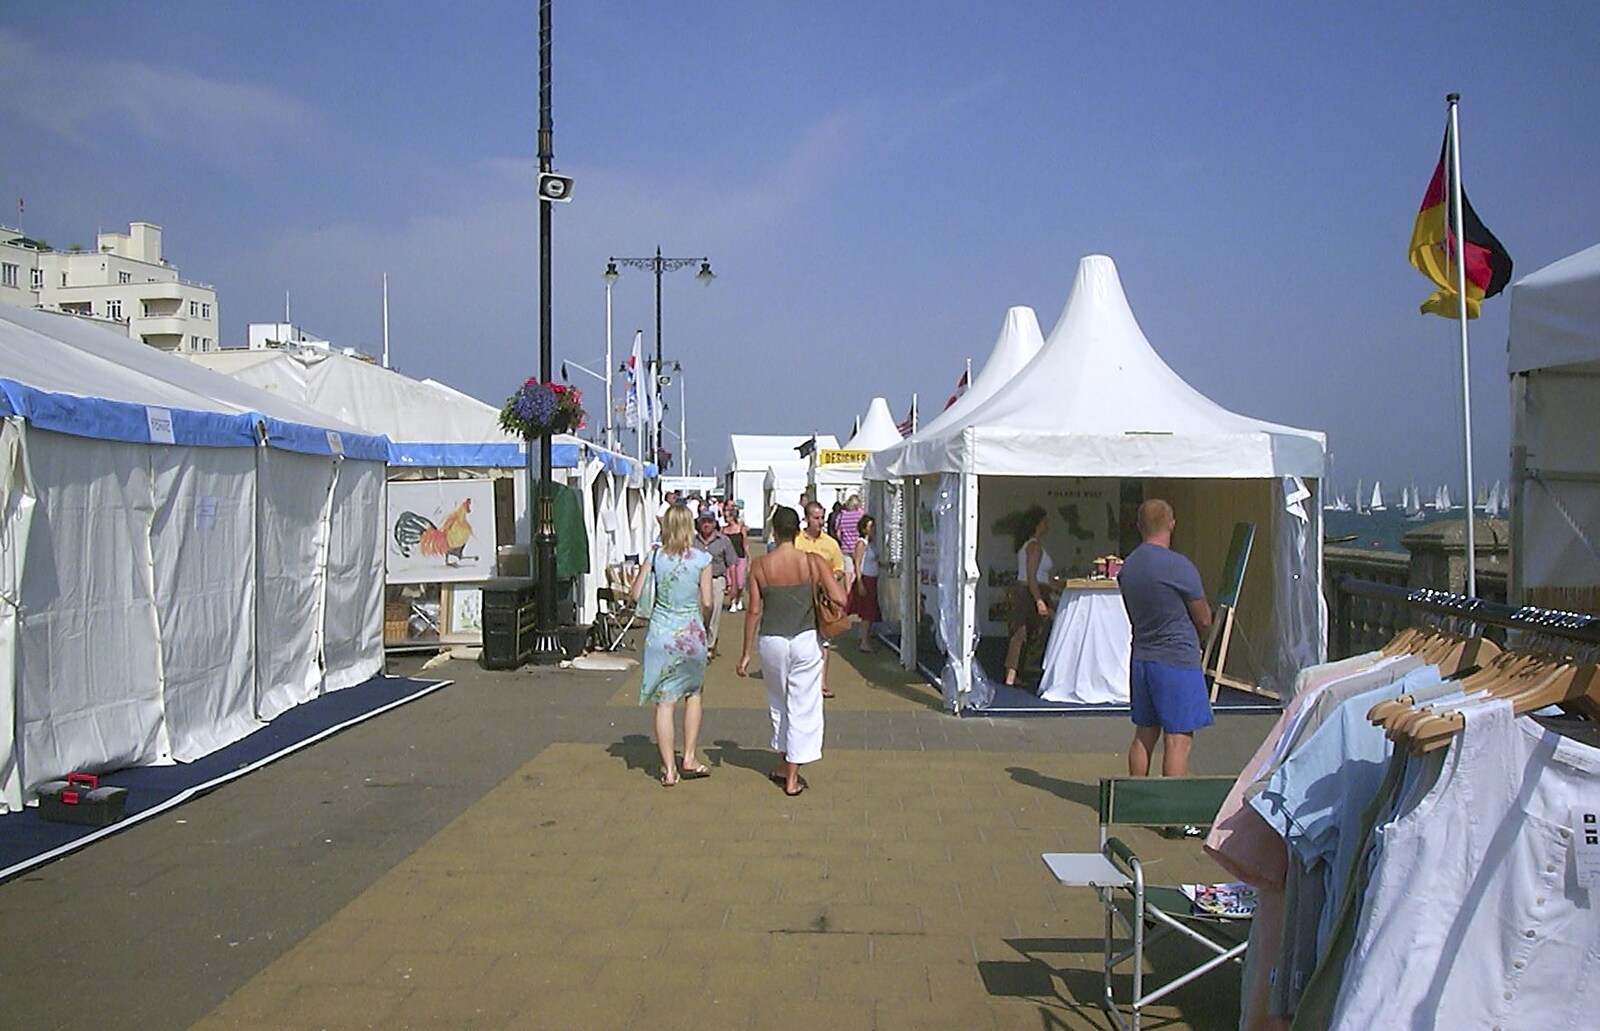 Sponsors tents get ready for the day from Cowes Weekend, Cowes, Isle of Wight - 7th August 2004